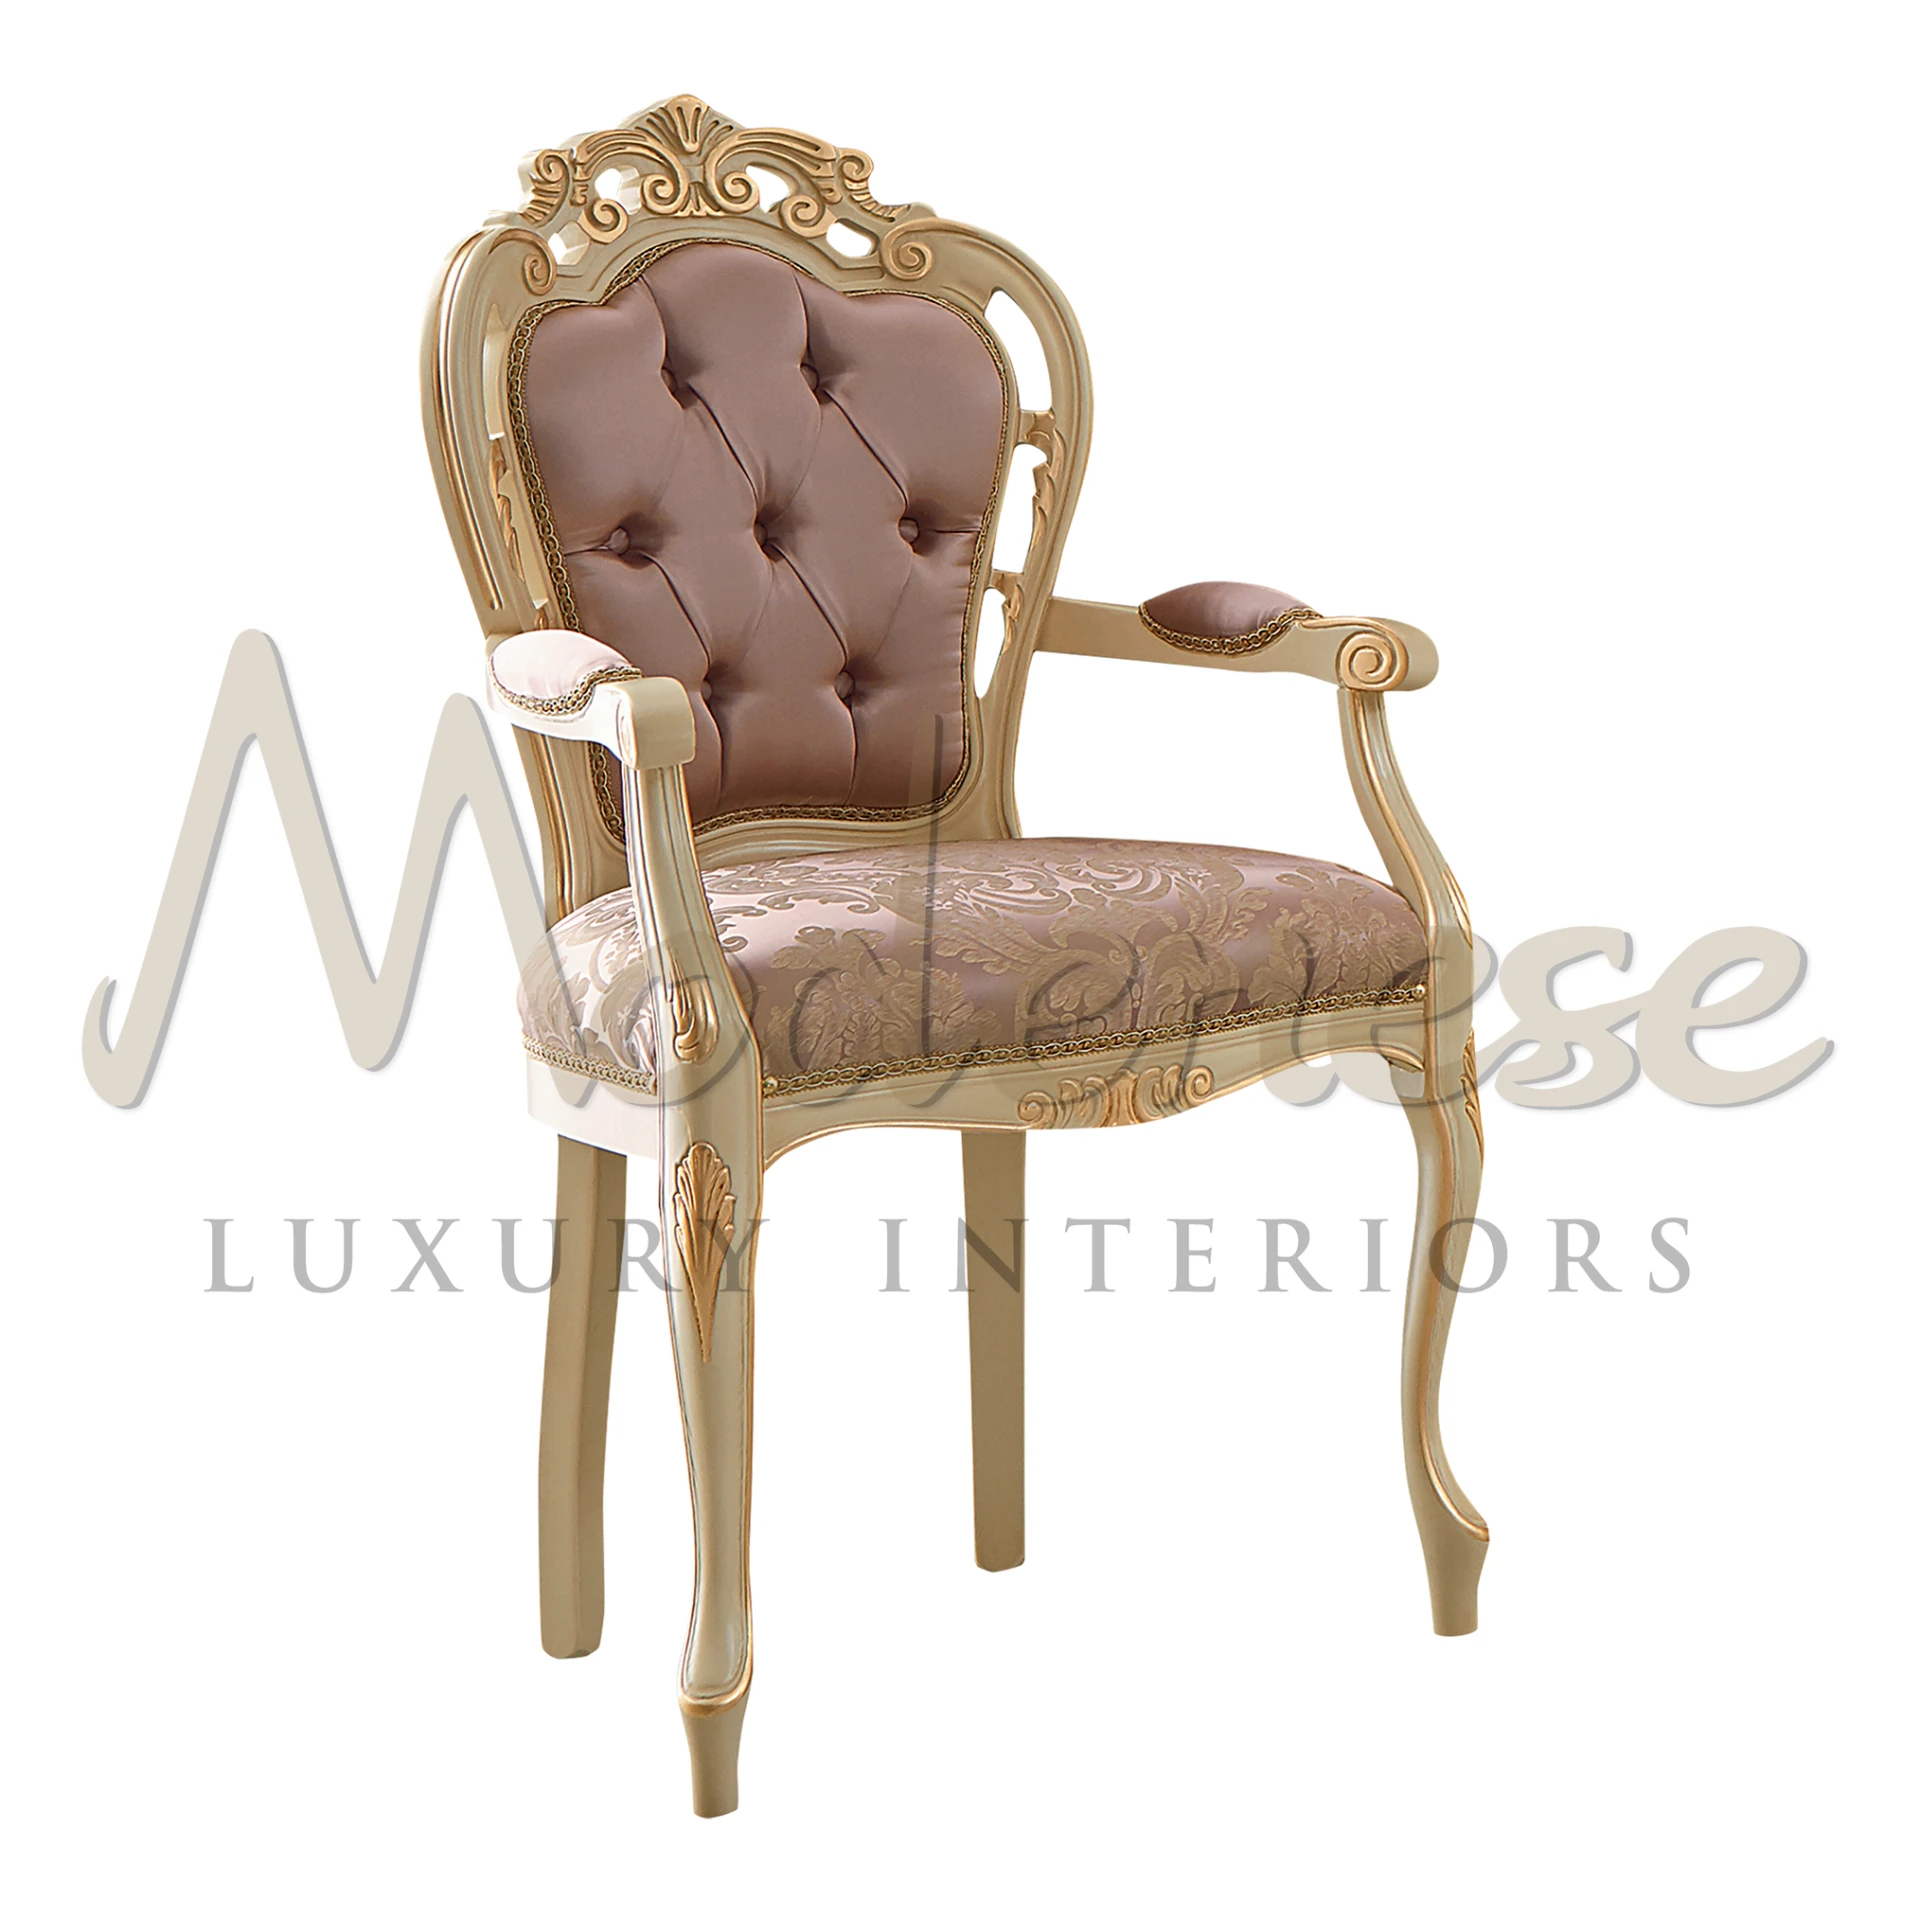 Stylish hand-made Pink Fabric Chair with intricate gold detailing and armrests.